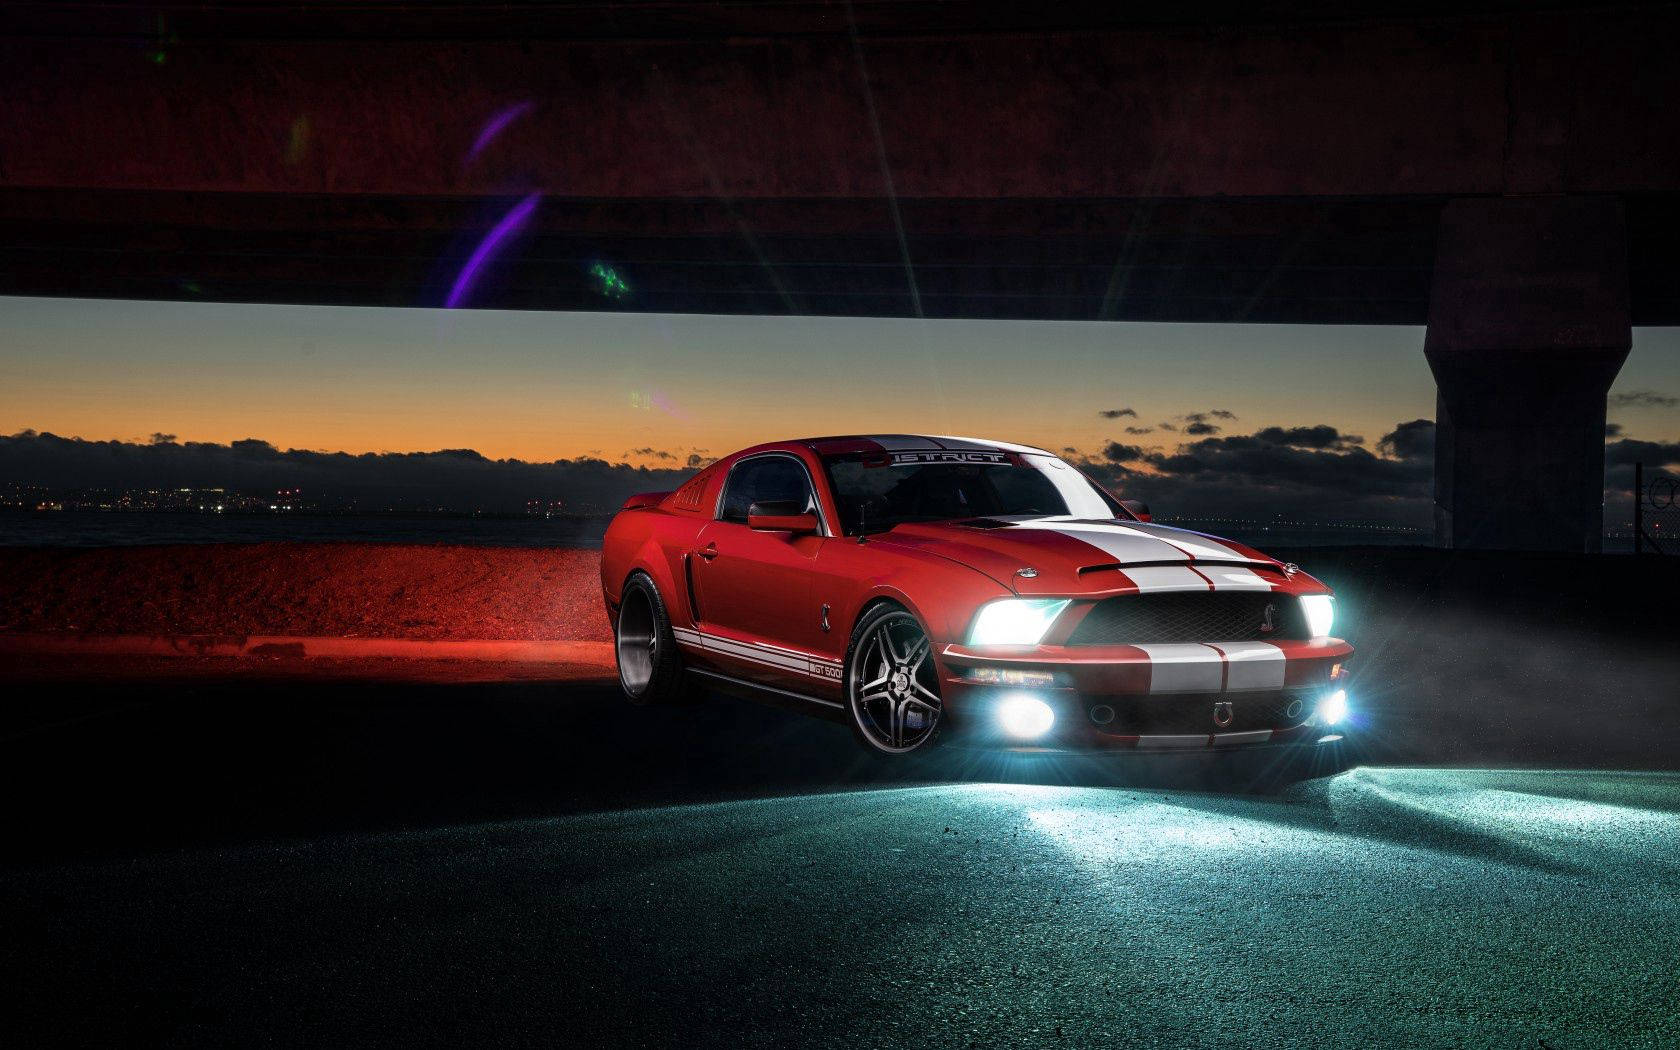 Under The Bridge Ford Shelby Mustang Wallpaper